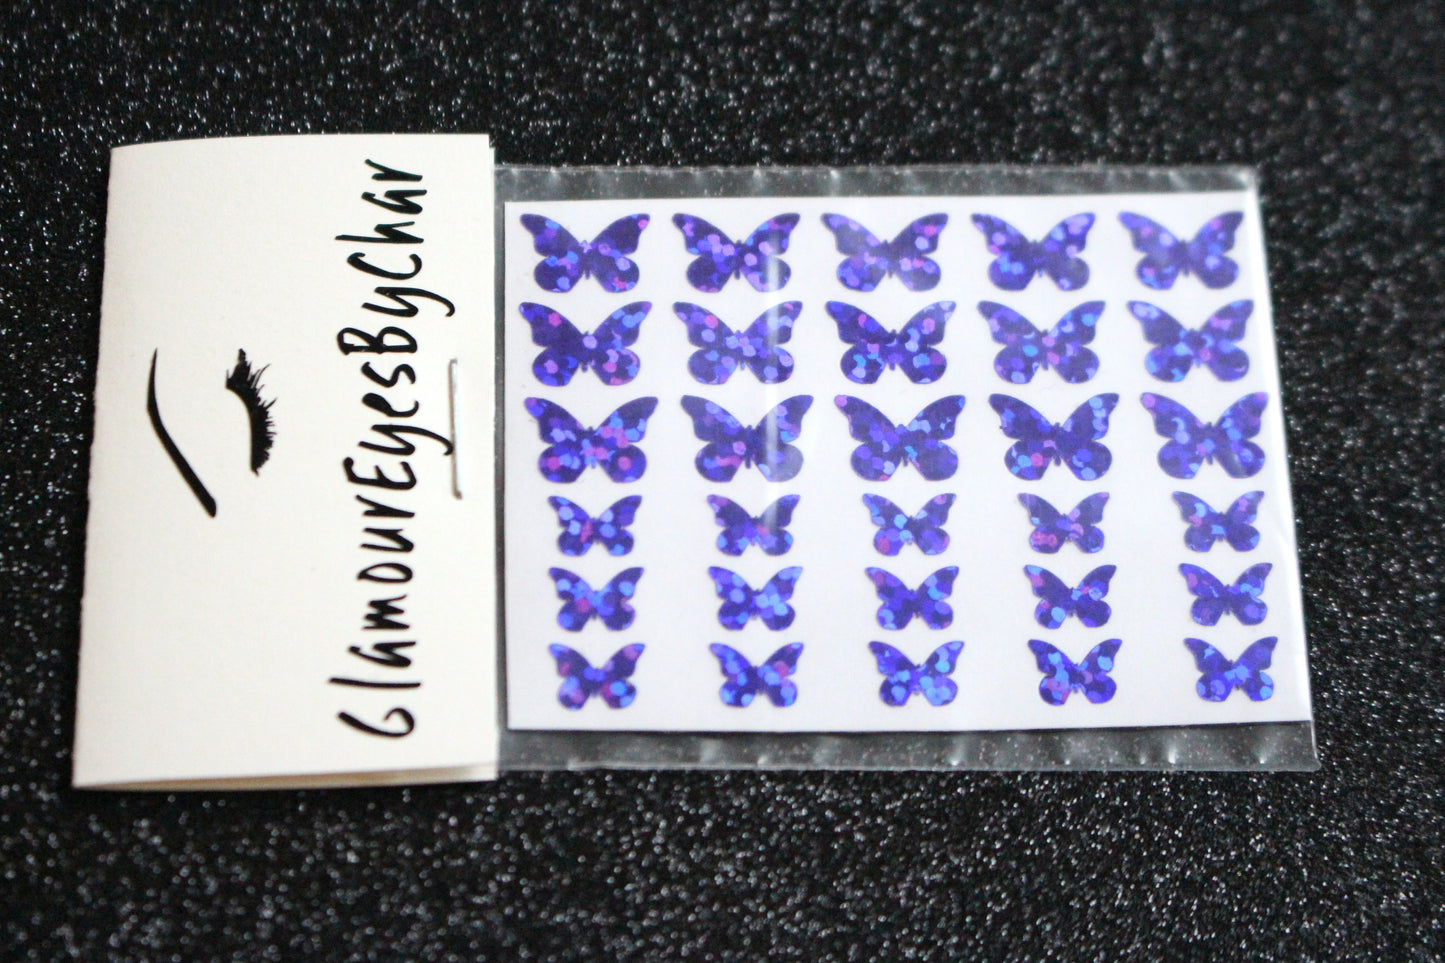 No need to go to the nail salon. Spice up your nails at home with these cute butterfly nail decals. They can be used on natural or acrylic nails. You can also apply them on top of regular or gel/shellac nail polish. These handmade decals can also be used for body art or any DIY project. Each pack contains 30 decals and is available in 5 different colours. The pack also includes 2 different sizes so that you can mix and match.  Tip: Apply some of our glitter on your nails to really GLAMOUREYES your look.